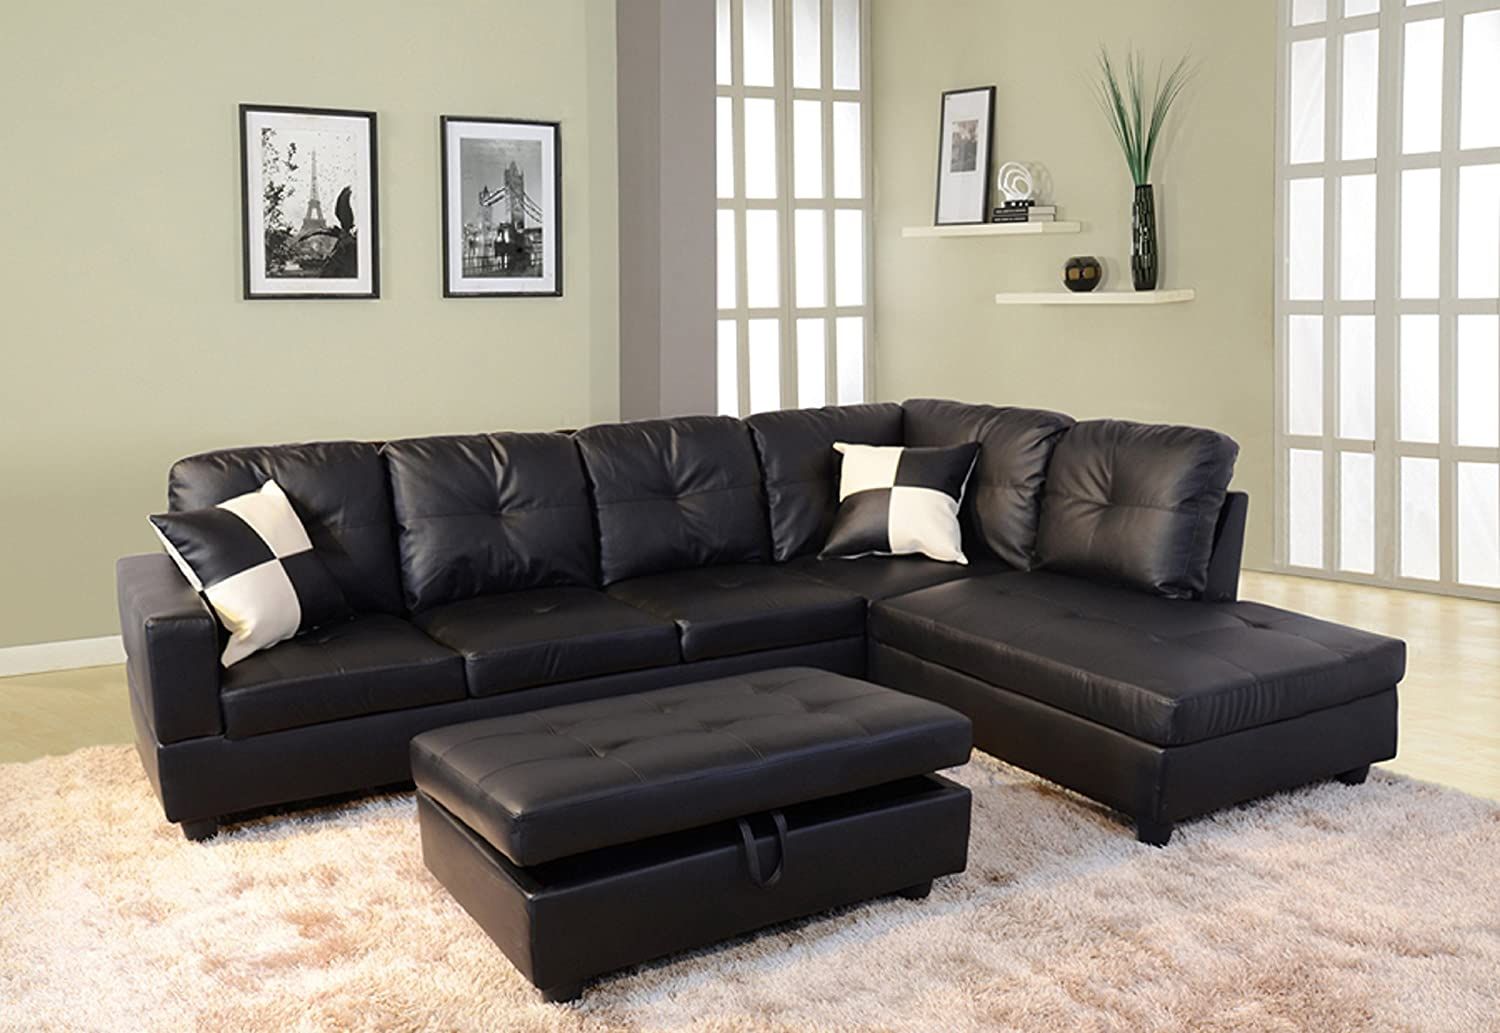 sectional sofa non leather doesn't sink